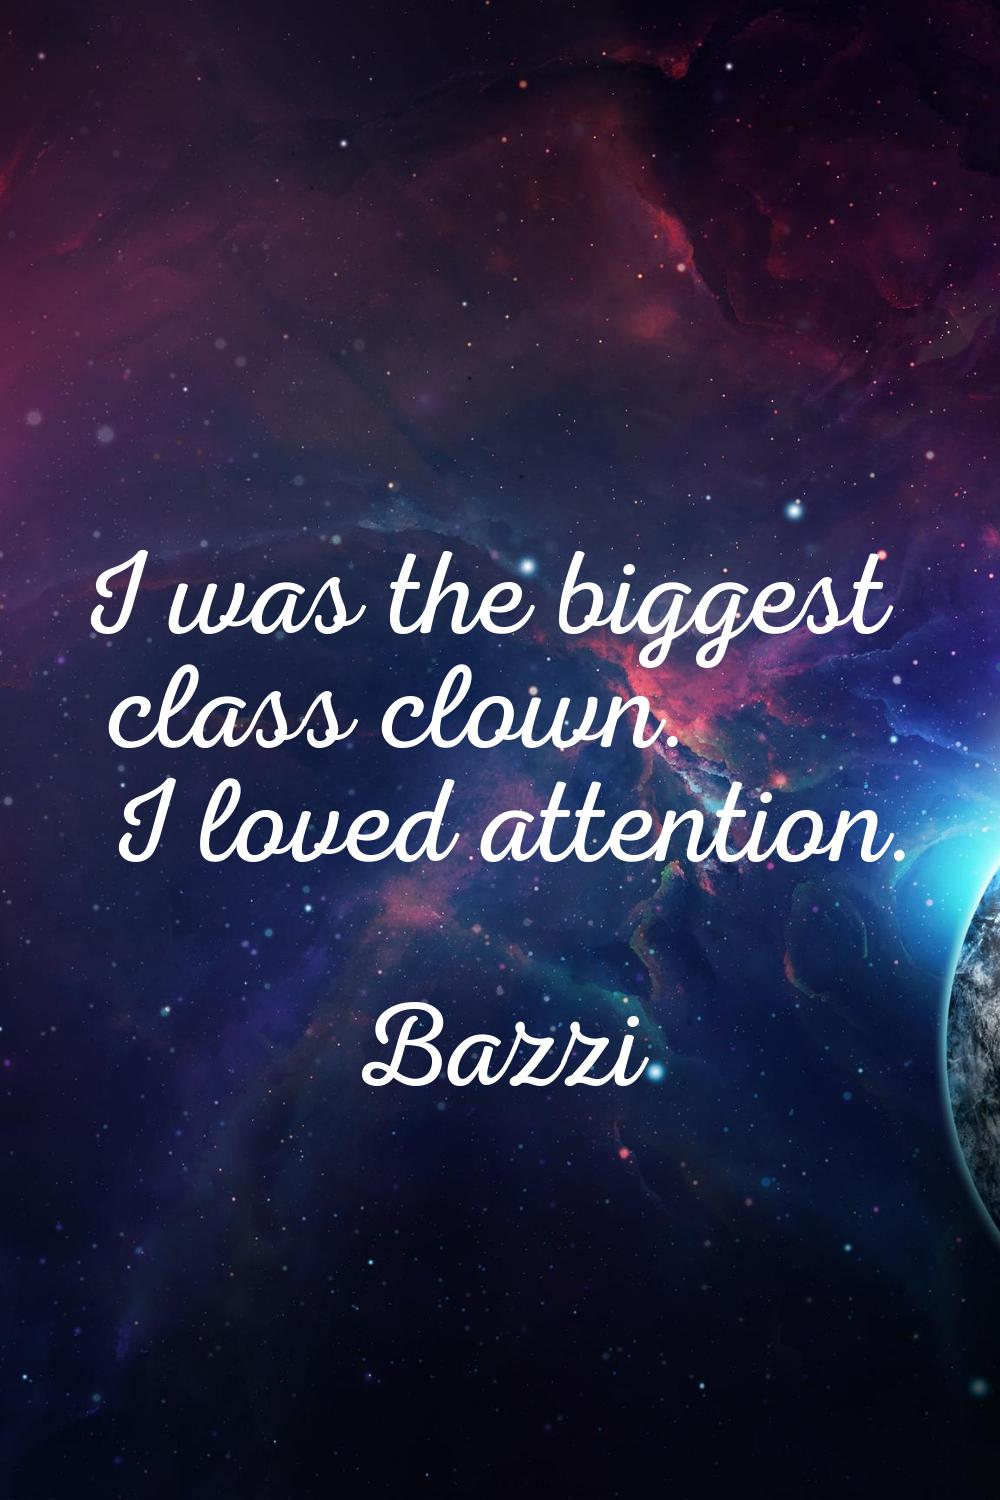 I was the biggest class clown. I loved attention.